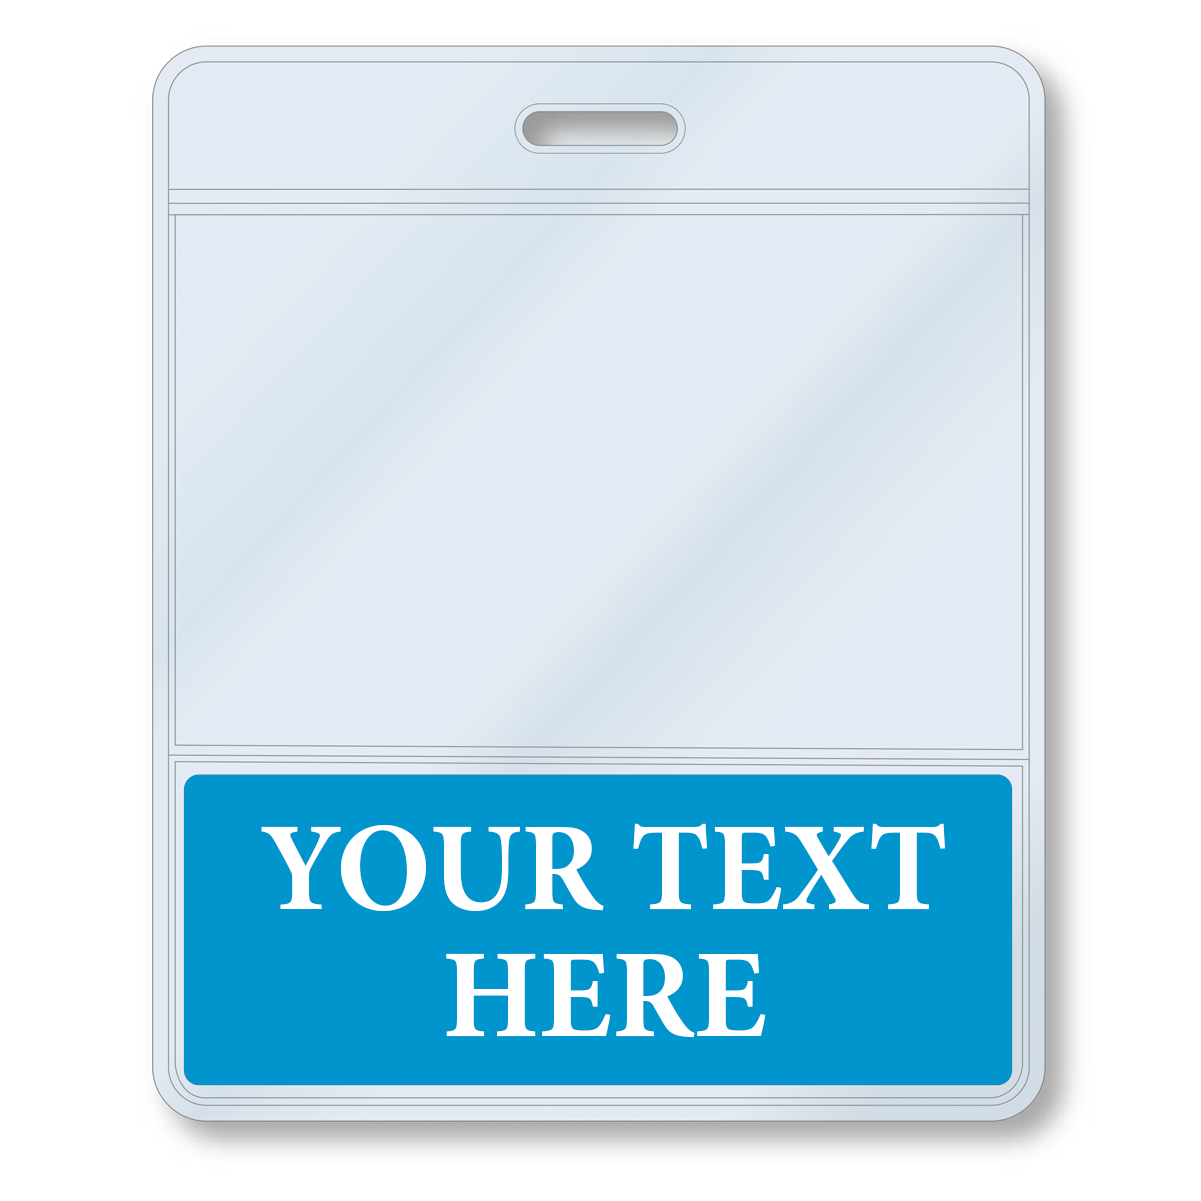 A Custom Printed BadgeBottoms® Horizontal (Badge Holder & Badge Buddy IN ONE) with a customizable title area at the top and the words "YOUR TEXT HERE" in white on a blue background at the bottom.